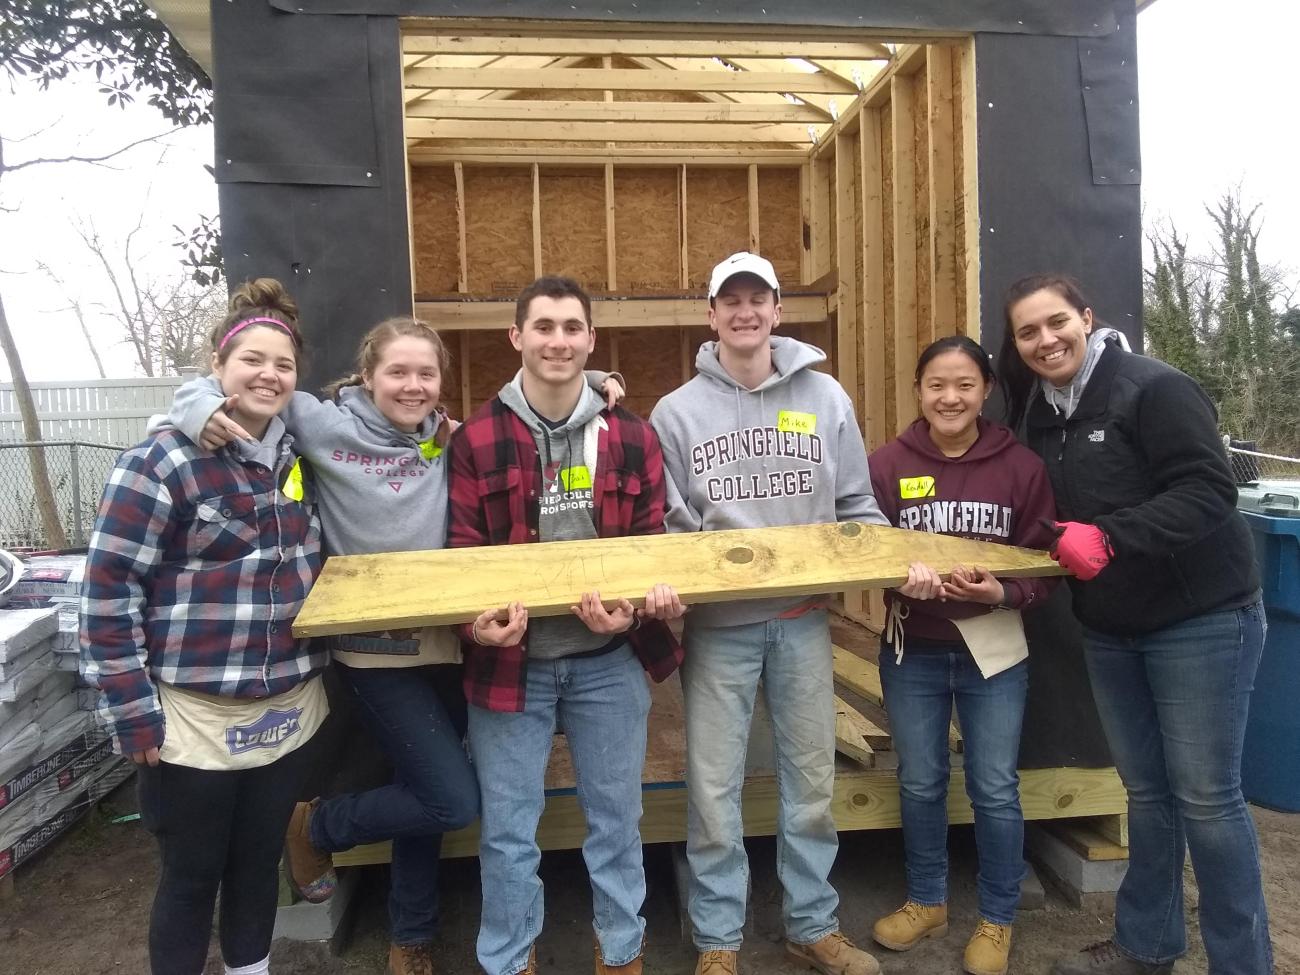 Working with Habitat for Humanity, participants will travel to Salem County, New Jersey, and spend five days working on a Collegiate Challenge build project and assist with the renovation and construction of affordable housing options for low-income families.